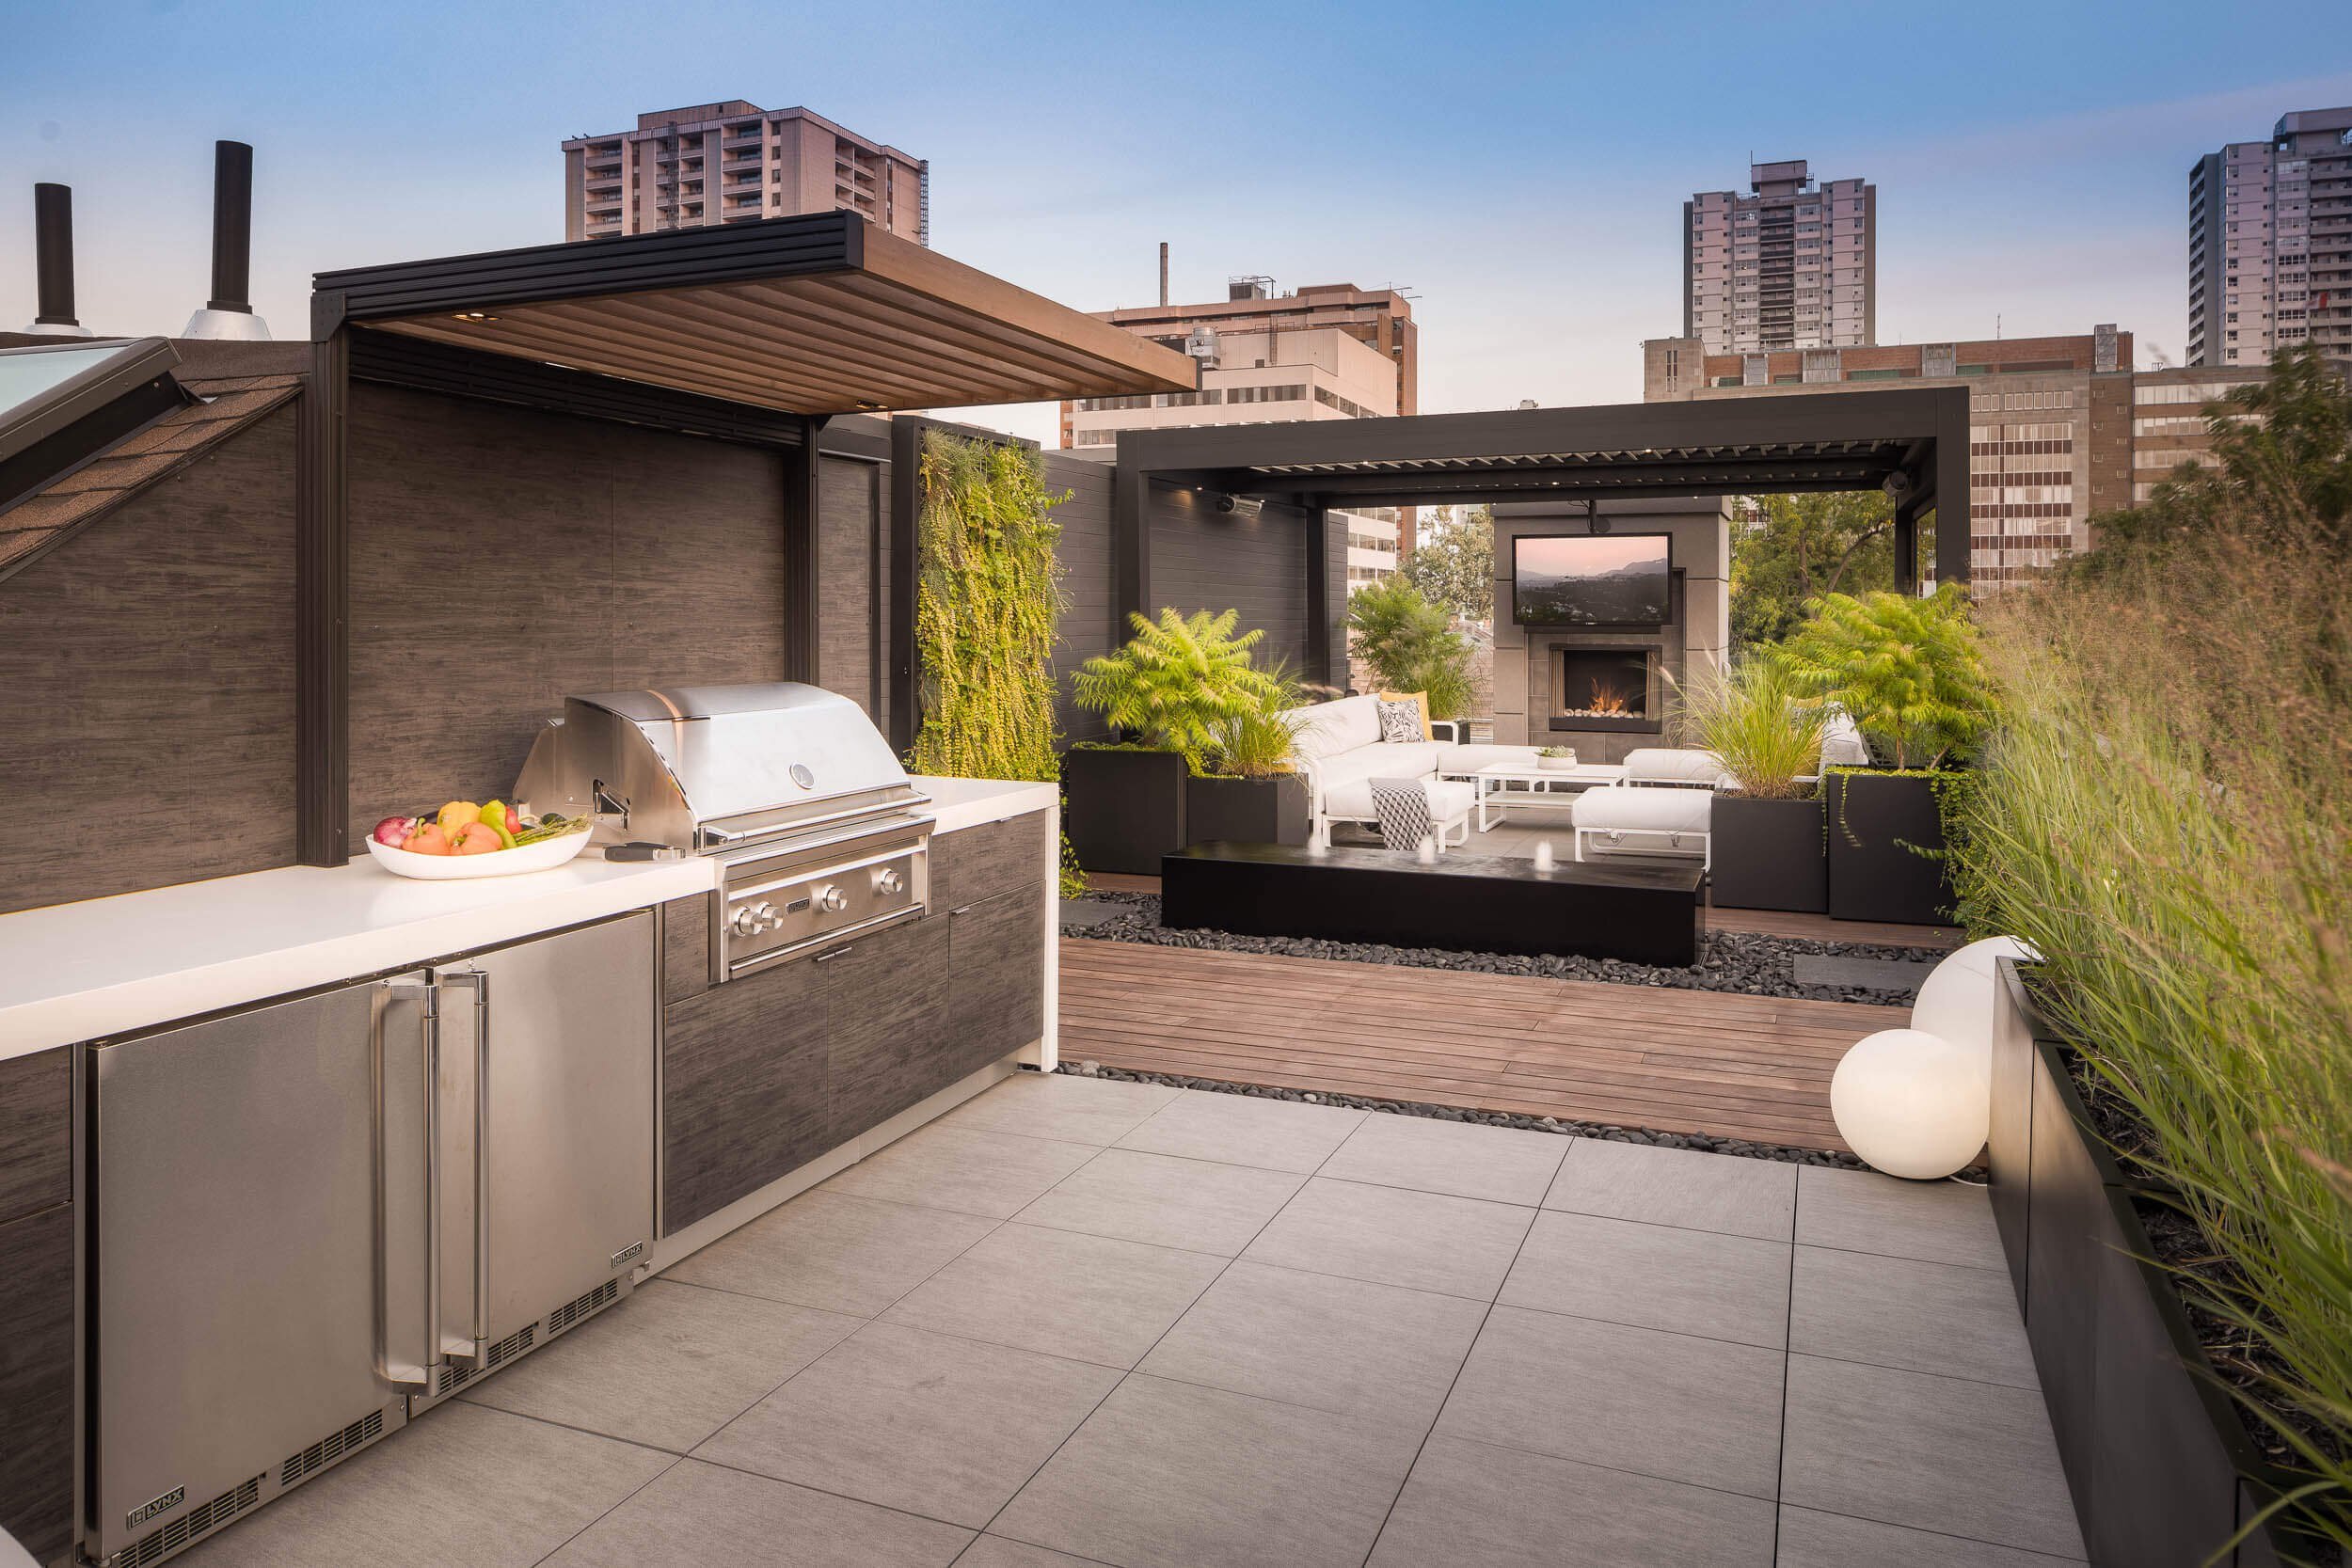 Set up Your Outdoor Kitchen on The Roof